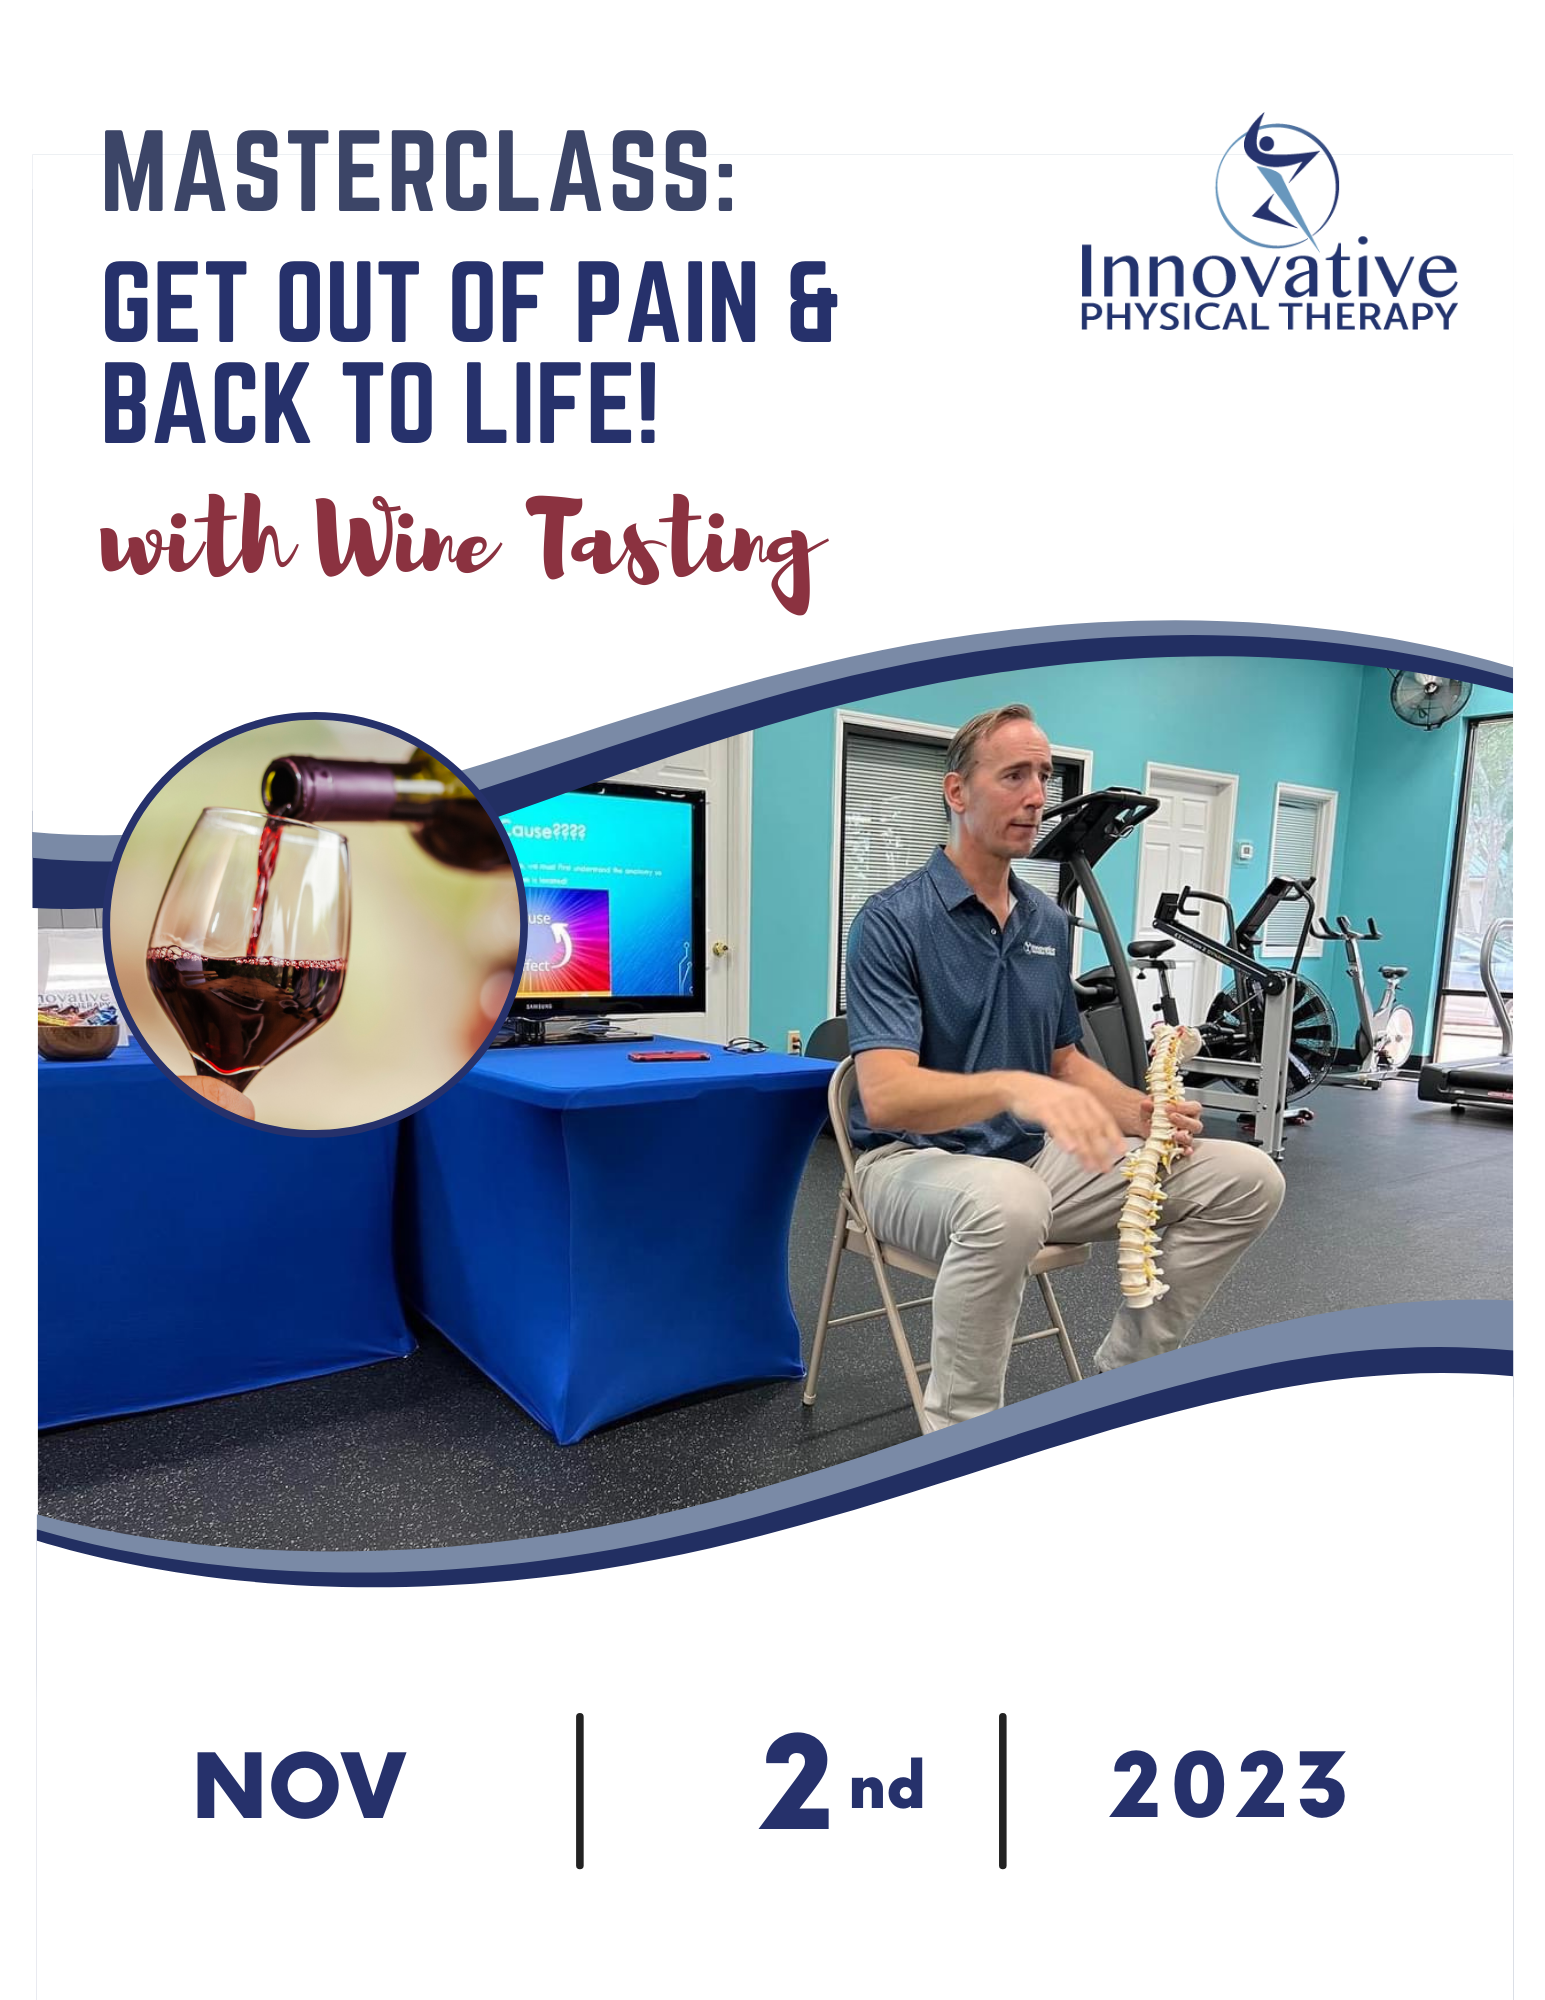 Innovative Physical Therapy Masterclass:Get out of pain and back to life!